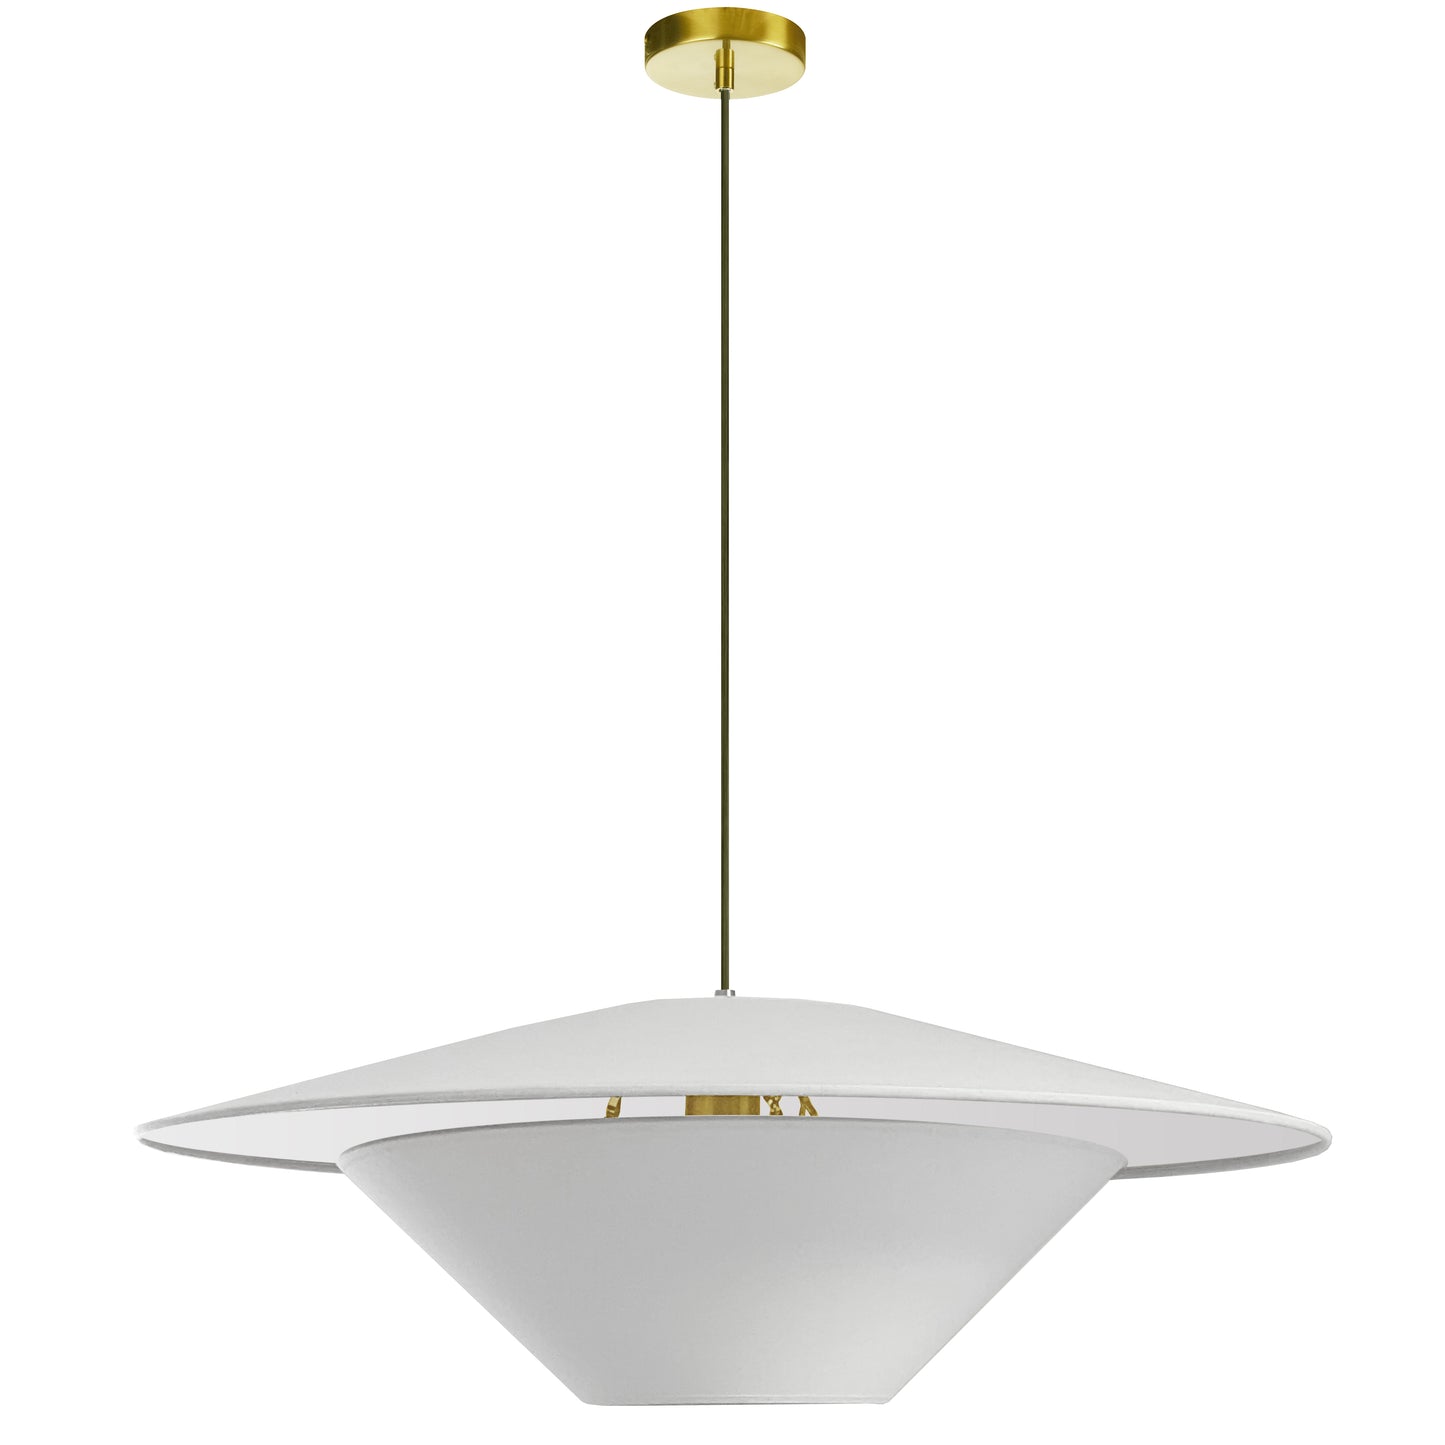 Dainolite PSO-241P-AGB-790 1 Light Incandescent Pendant, Aged Brass with White Shade